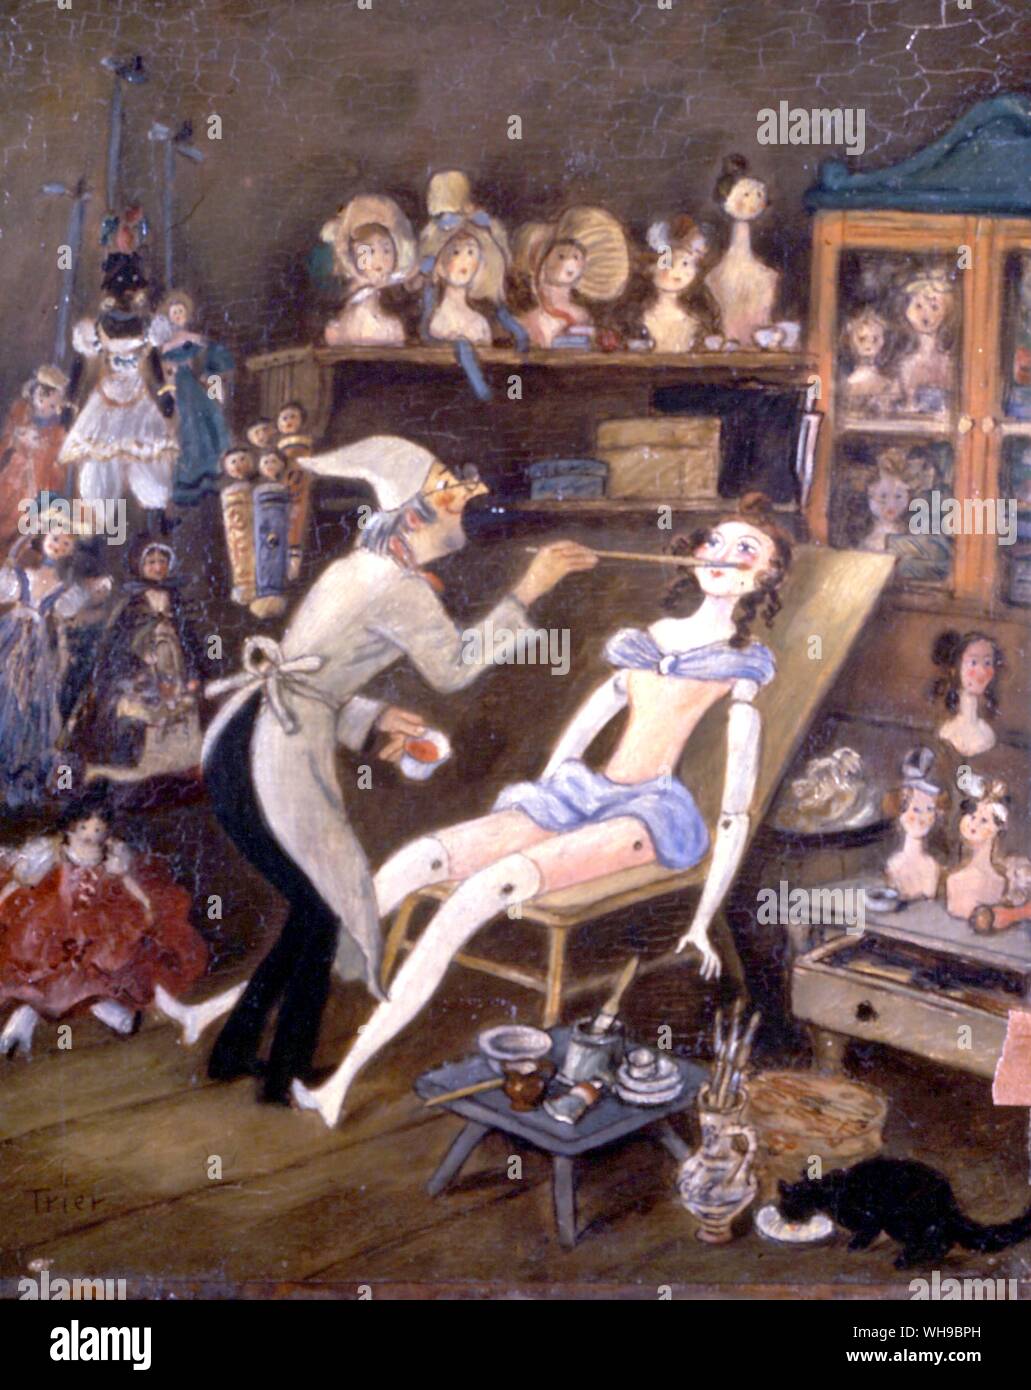 Book illustration showing a carpenter painting his life-size toy girl puppet. Stock Photo